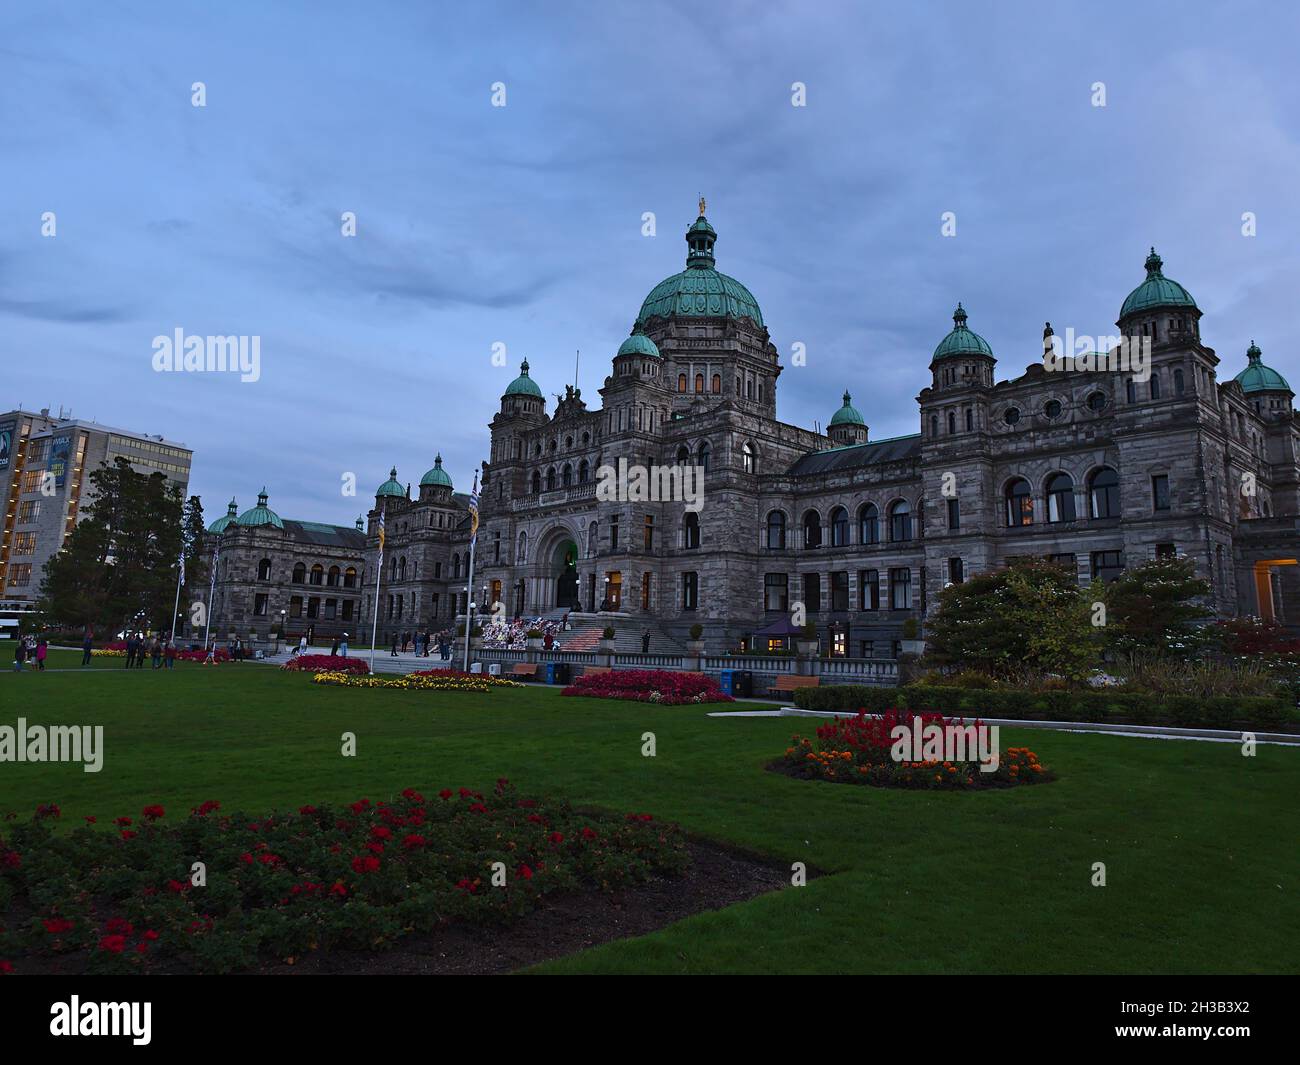 View of historic British Columbia Parliament Buildings, home to the Legislative Assembly of British Columbia, in the evening with cloudy sky. Stock Photo